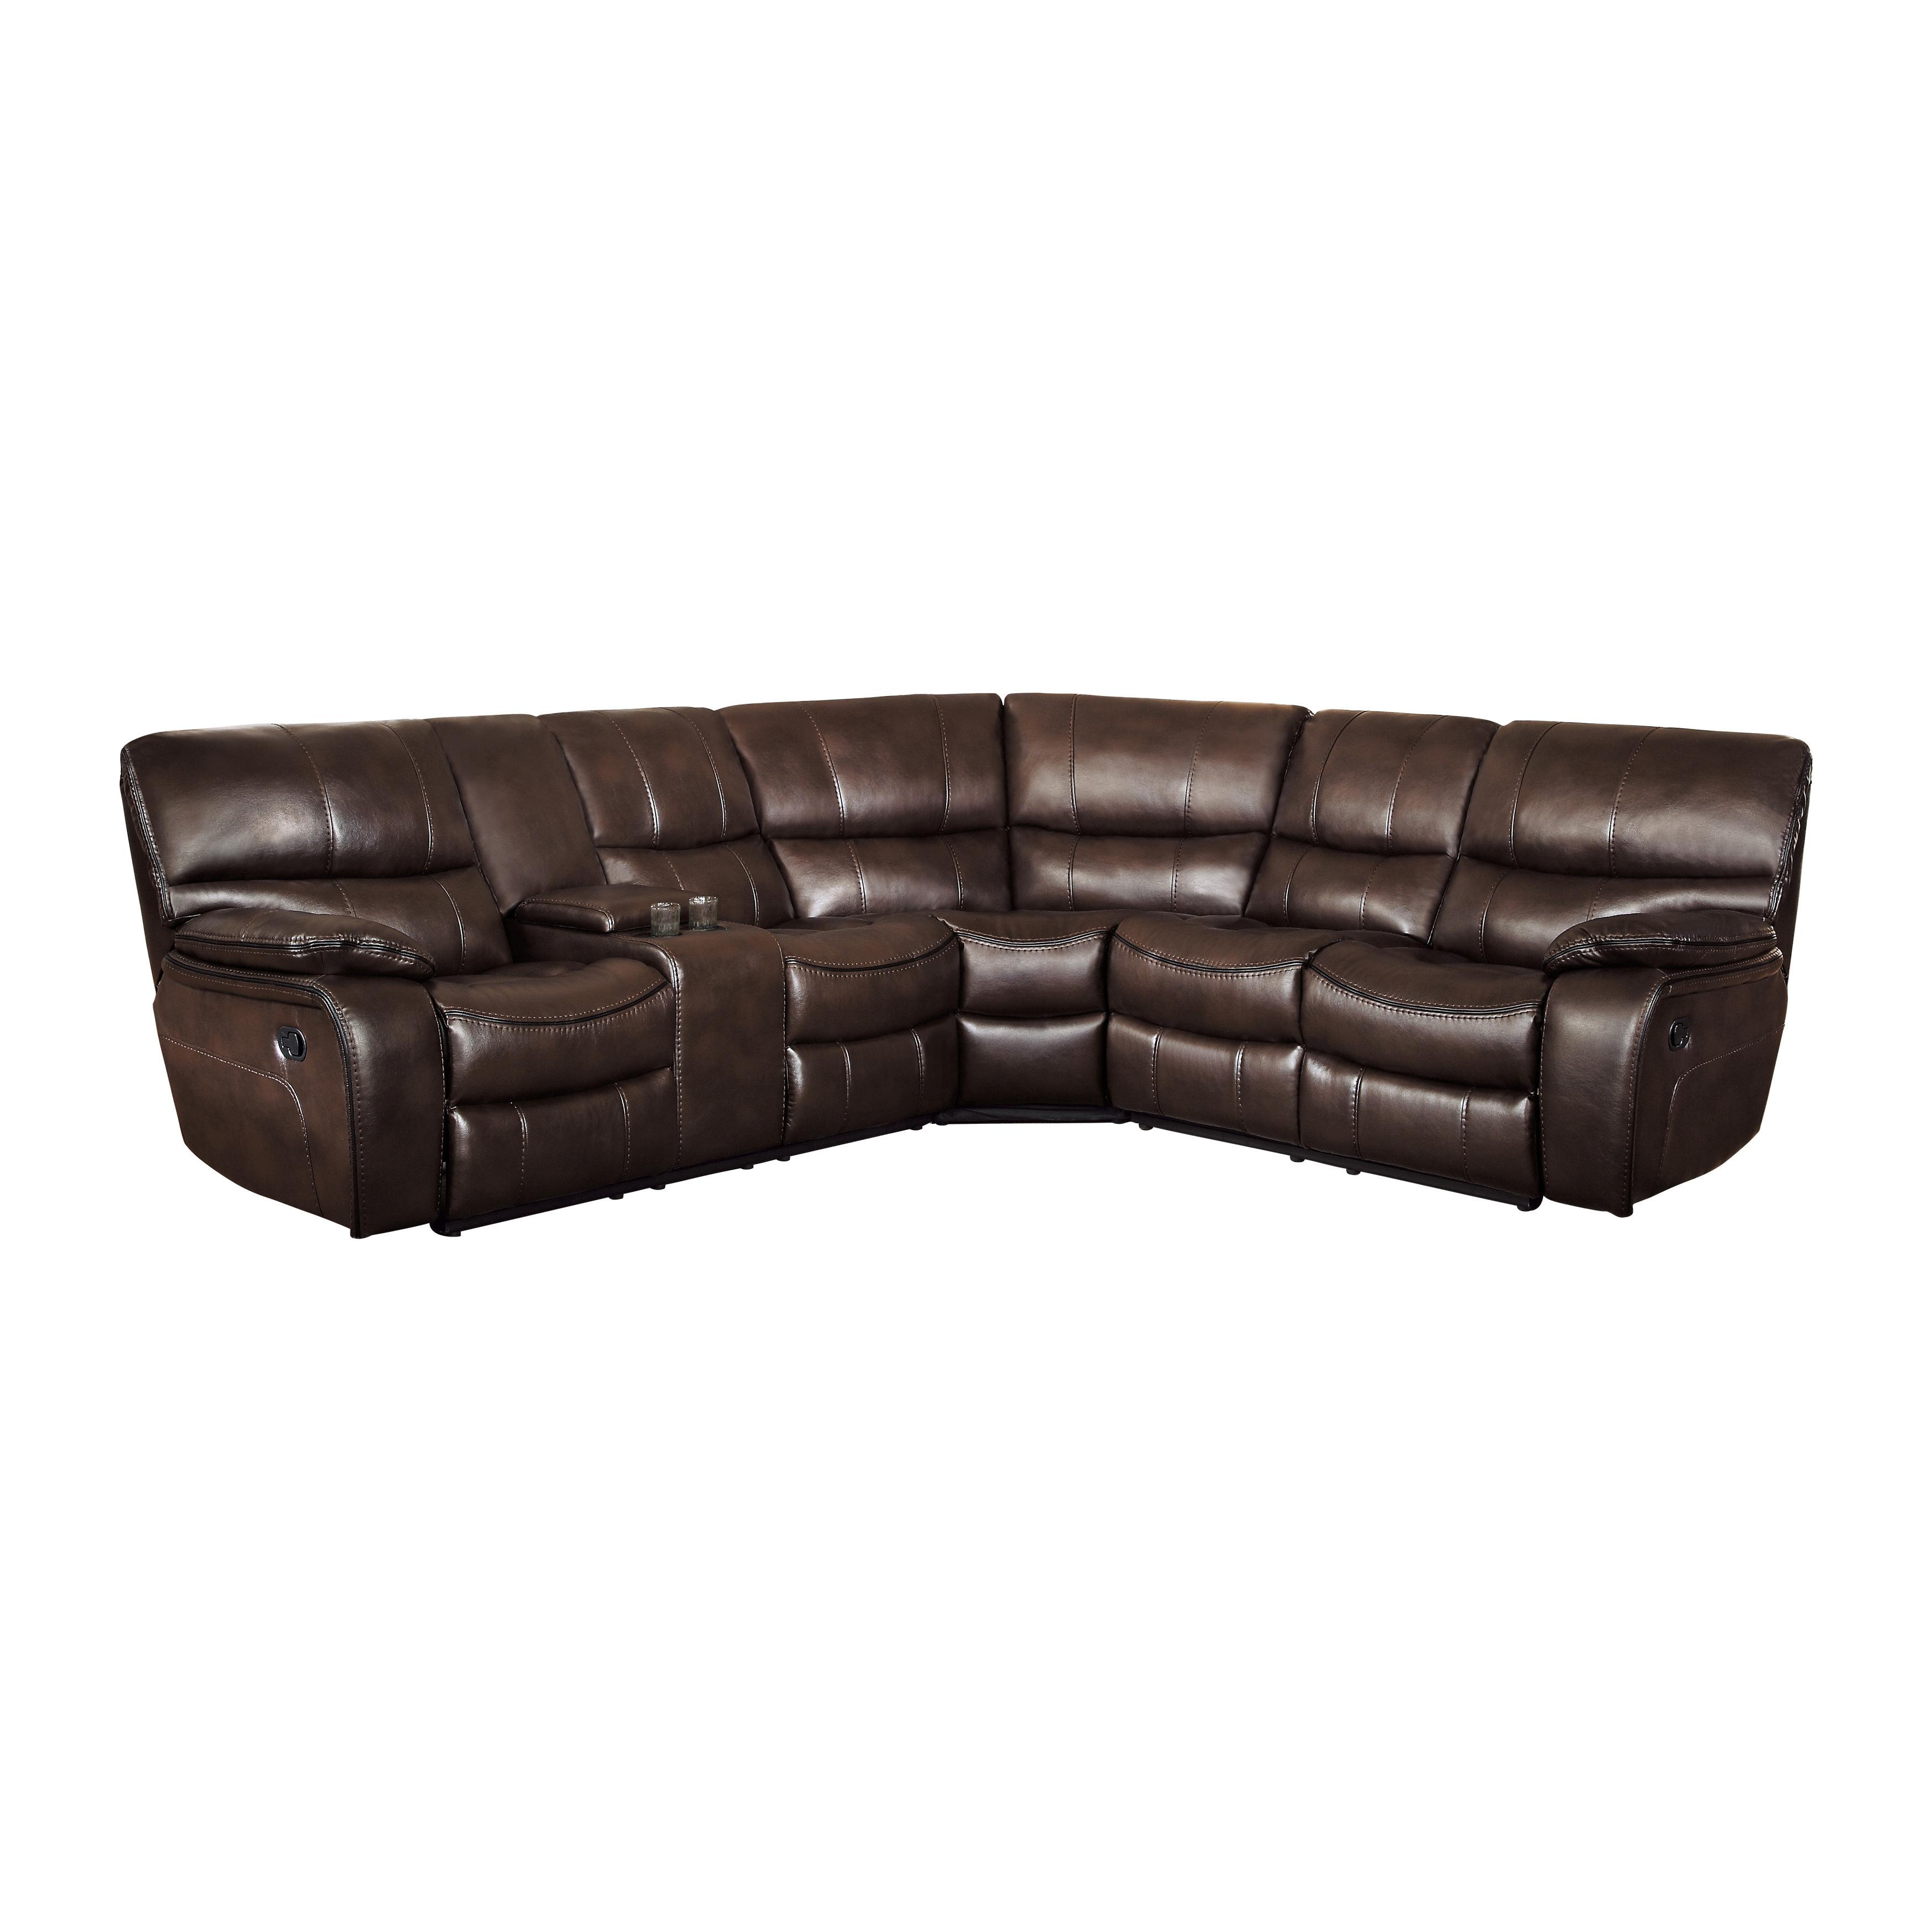 Modern Reclining Sectional 8480BRW*3SC Pecos 8480BRW*3SC in Dark Brown Faux Leather